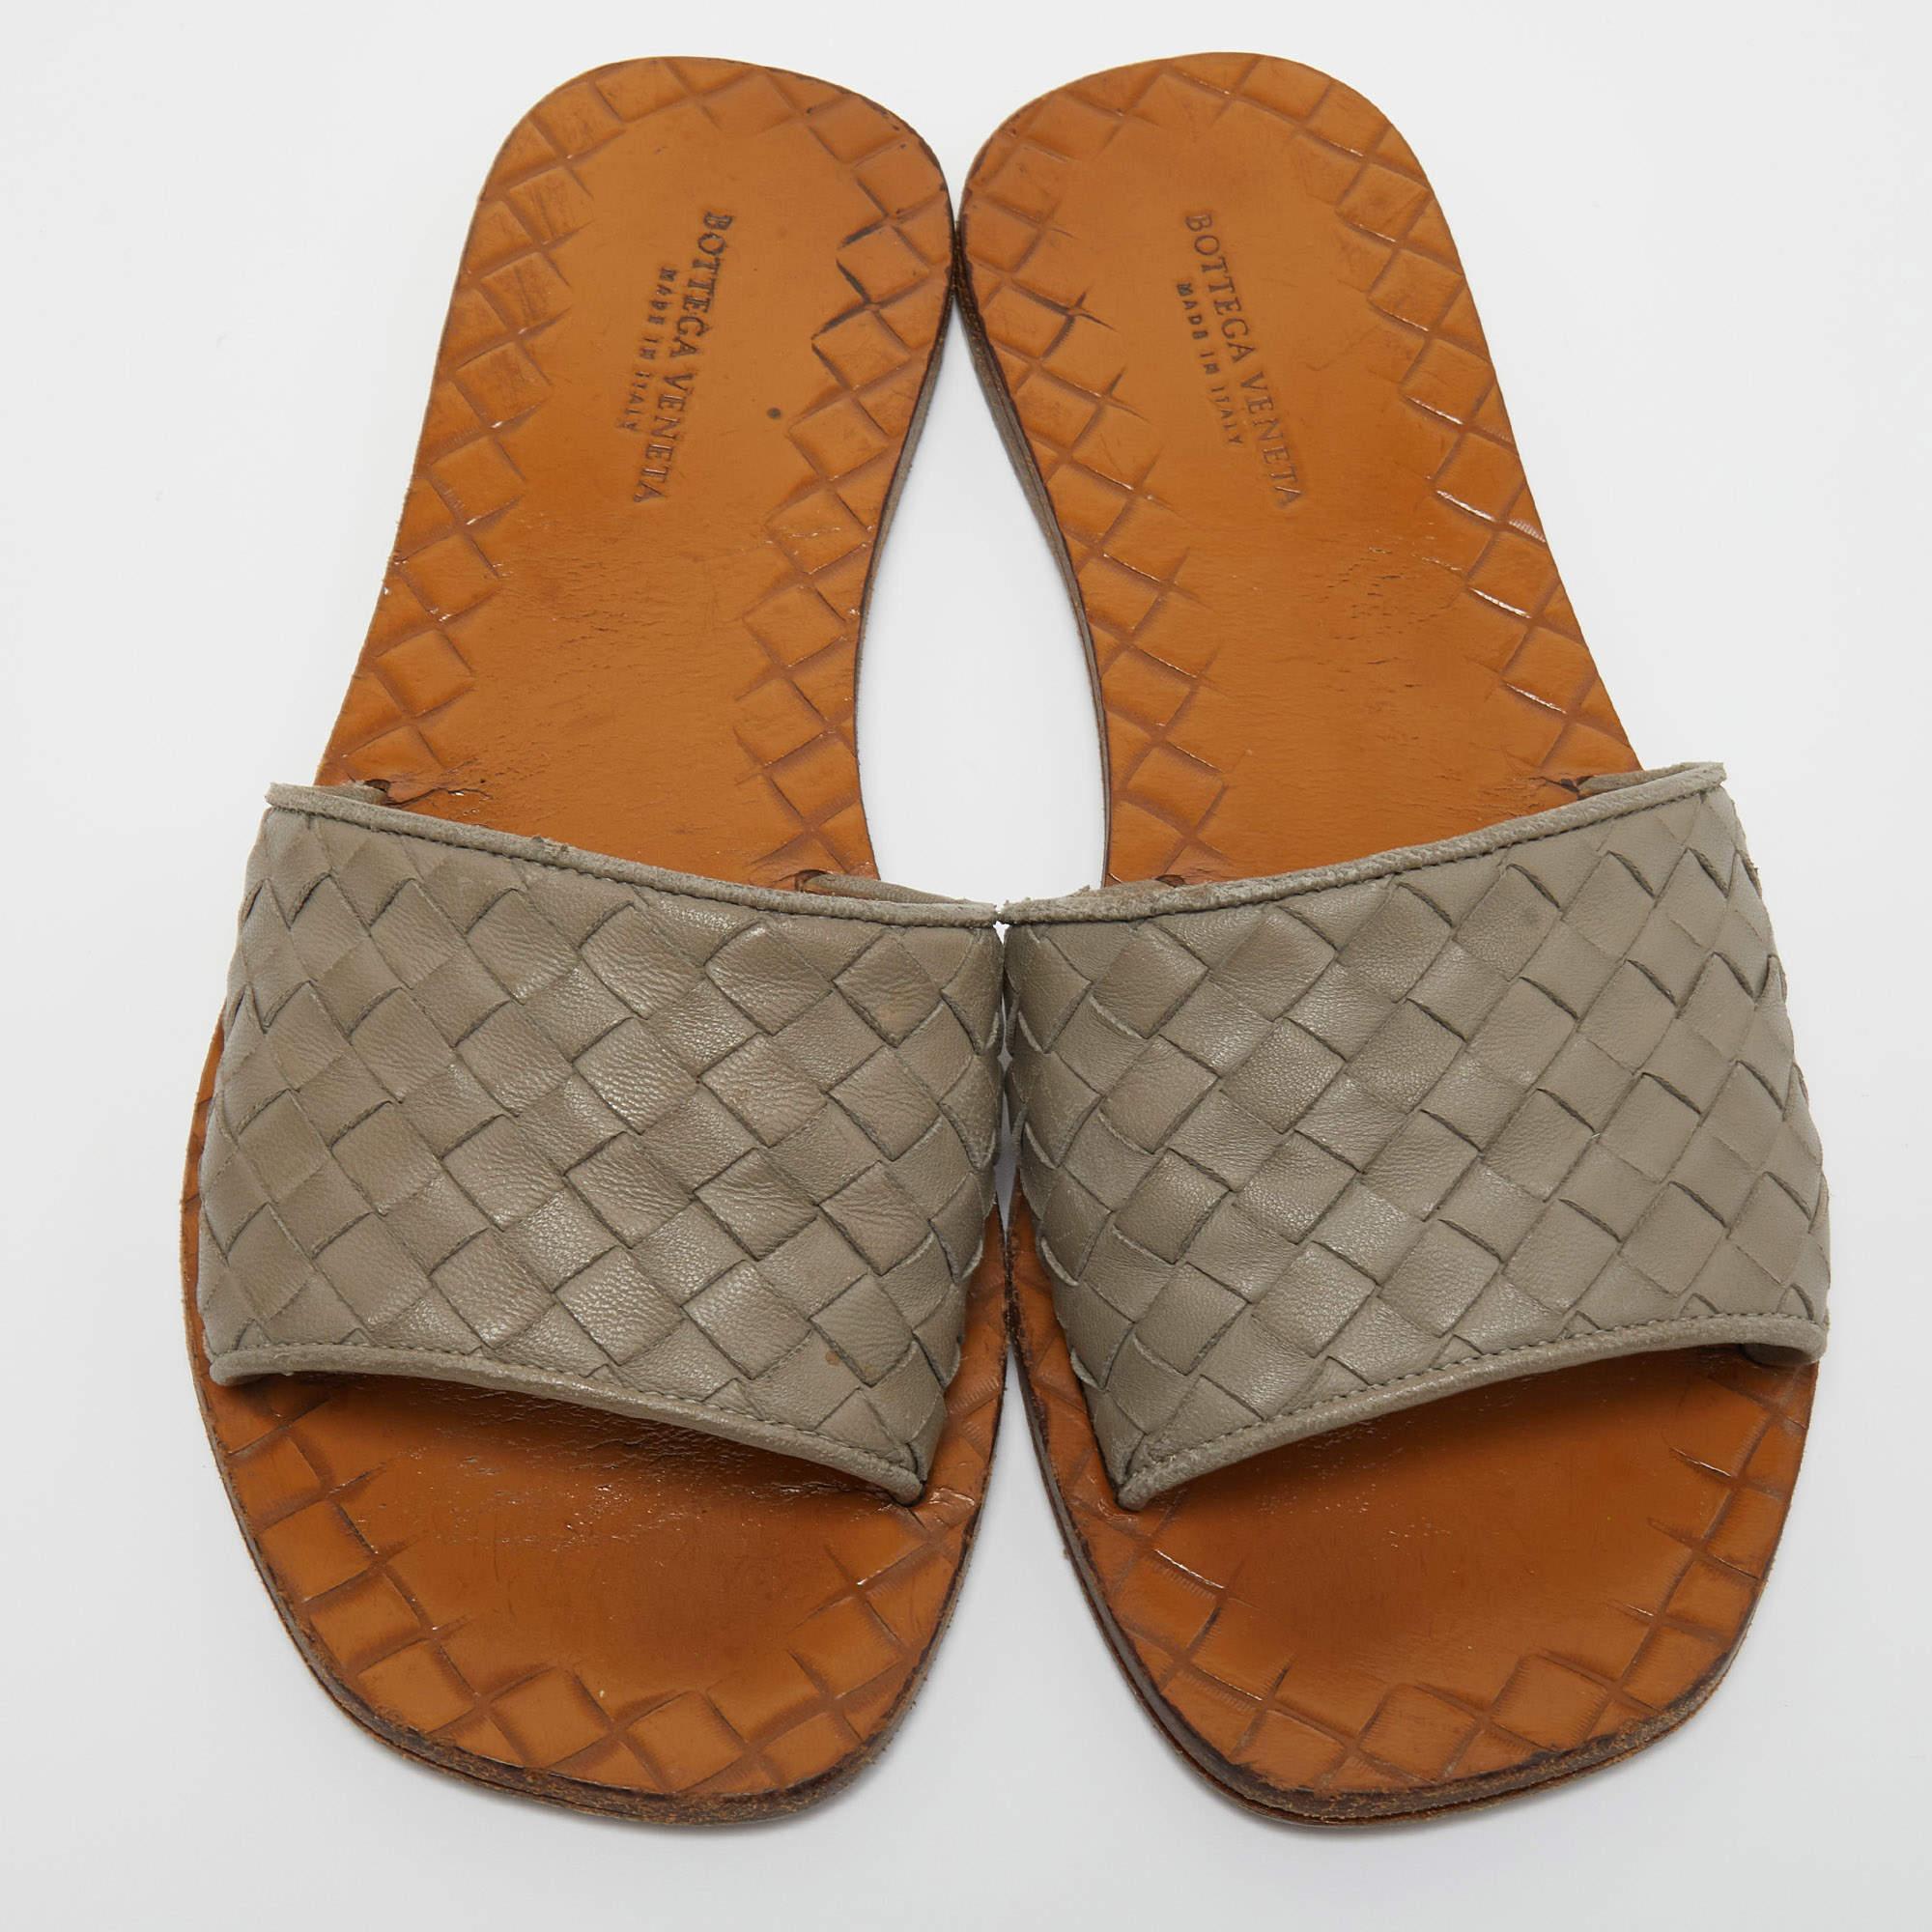 Frame your feet with these Bottega Veneta flat slides. Created using the best materials, the flats are perfect with short, midi, and maxi hemlines.

Includes: Original Dustbag, Original Box, Info Booklet

